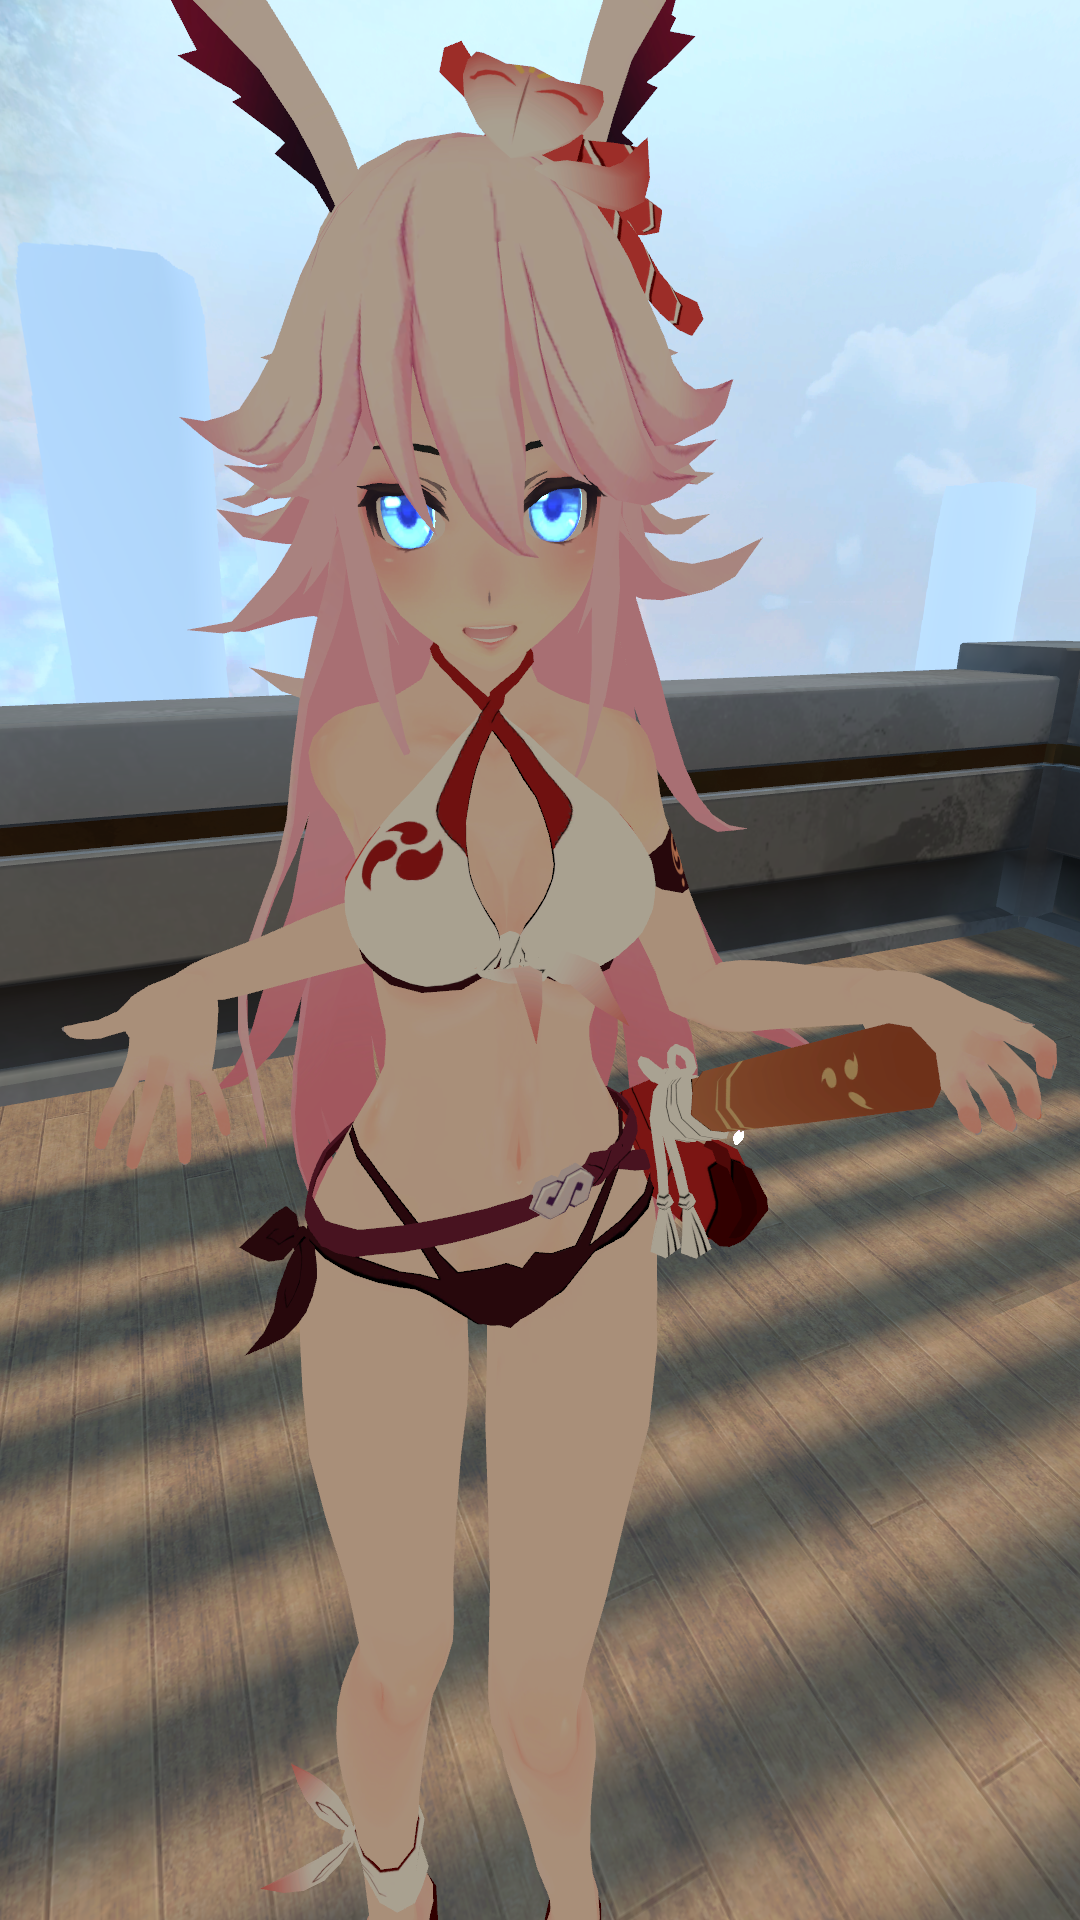 VRChat_1920x1080_2018-04-29_01-40-50.464.png